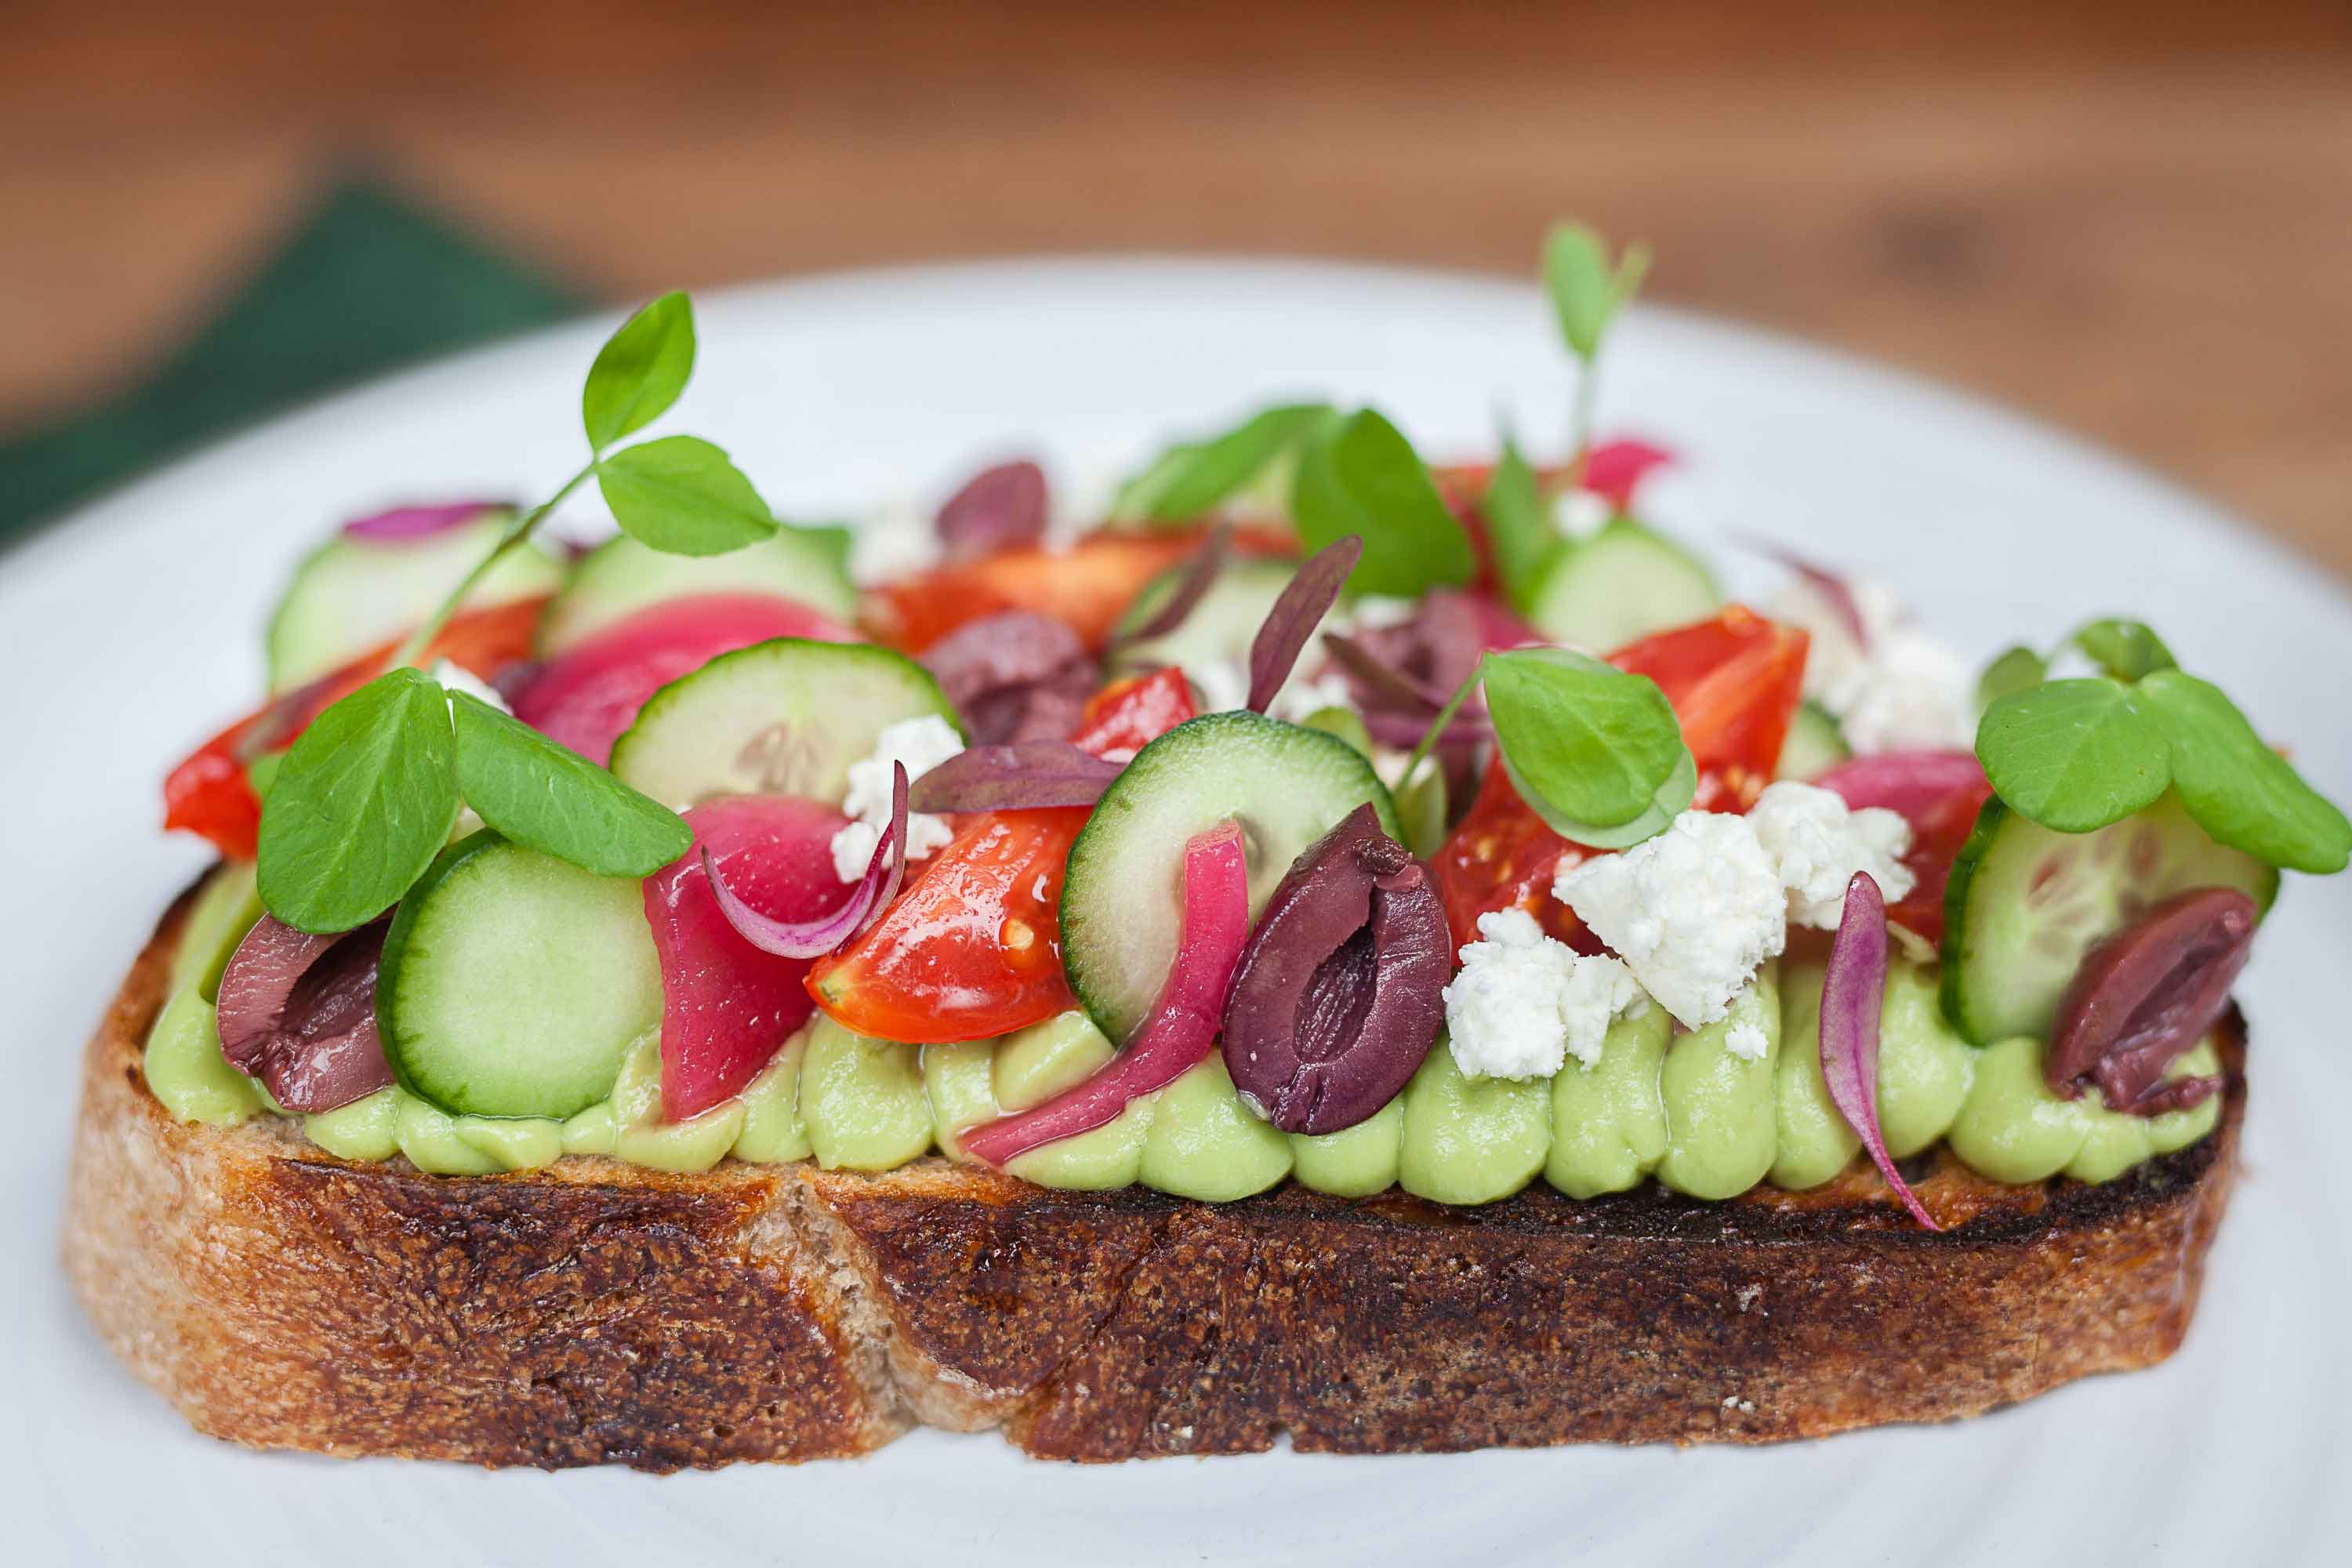 salad toast with cucumber olives tomatoes and some other ingredients